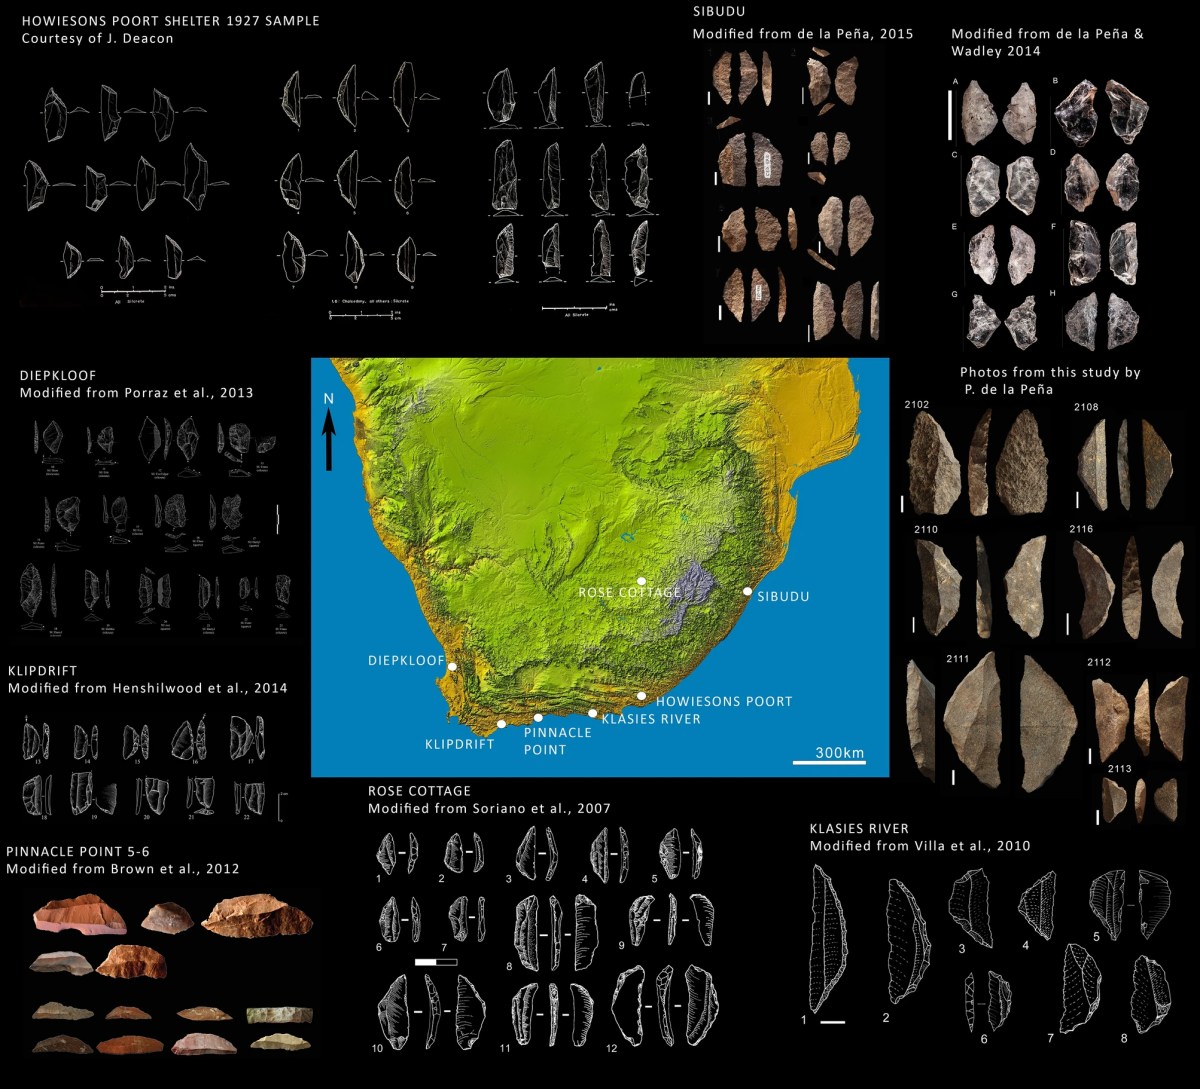 Map of the seven sites where ancient 'Swiss Army knives' were found in southern Africa that were analyzed in the study.